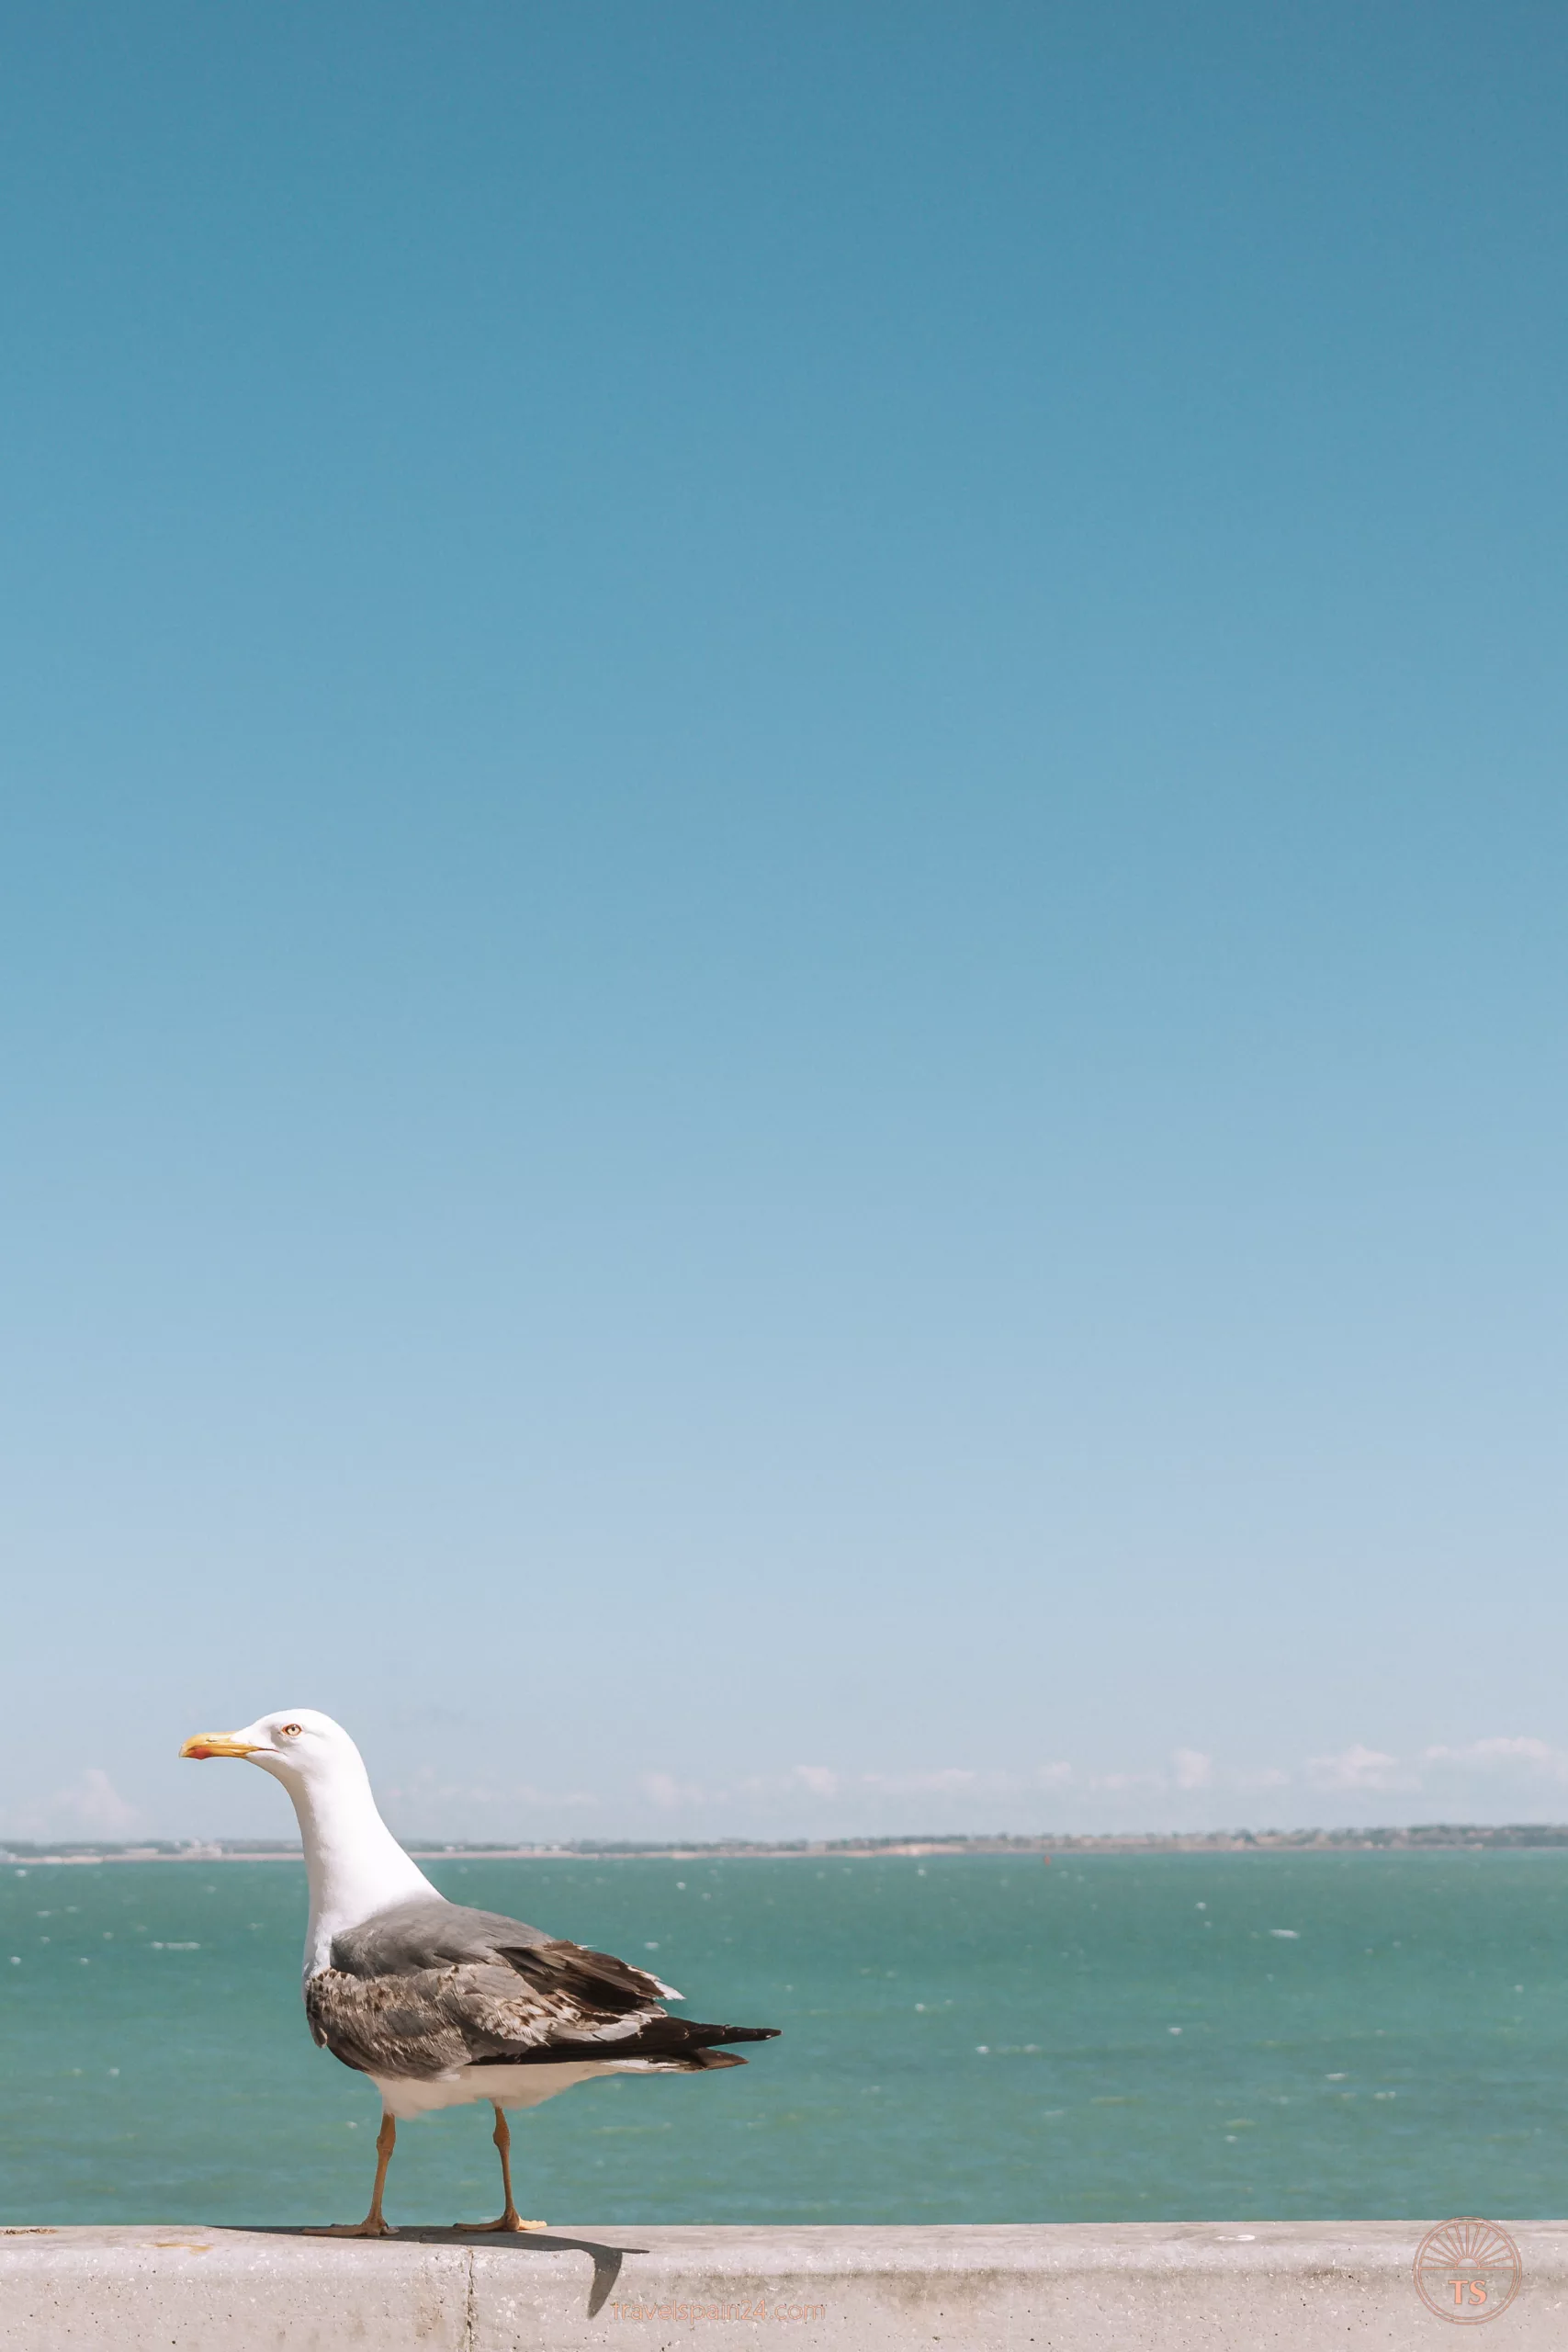 Close-up of a seagull, highlighting its detailed features and feathers. This image captures one of the coastal highlights commonly seen around Cadiz, reflecting the city's natural wildlife.
